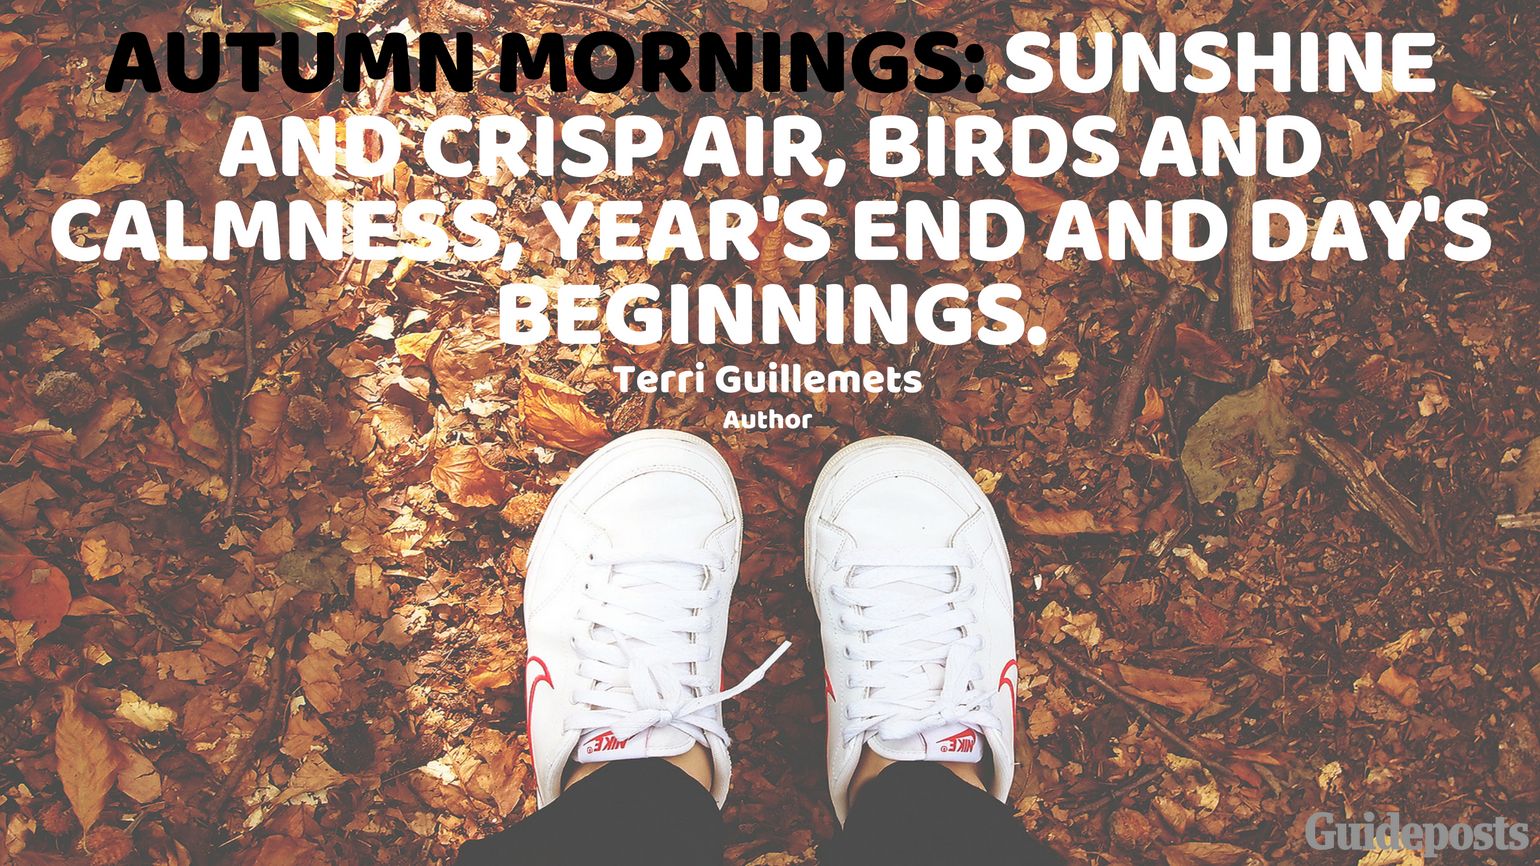 Autumn mornings: sunshine and crisp air, birds and calmness, year's end and day's beginnings. —Terri Guillemets